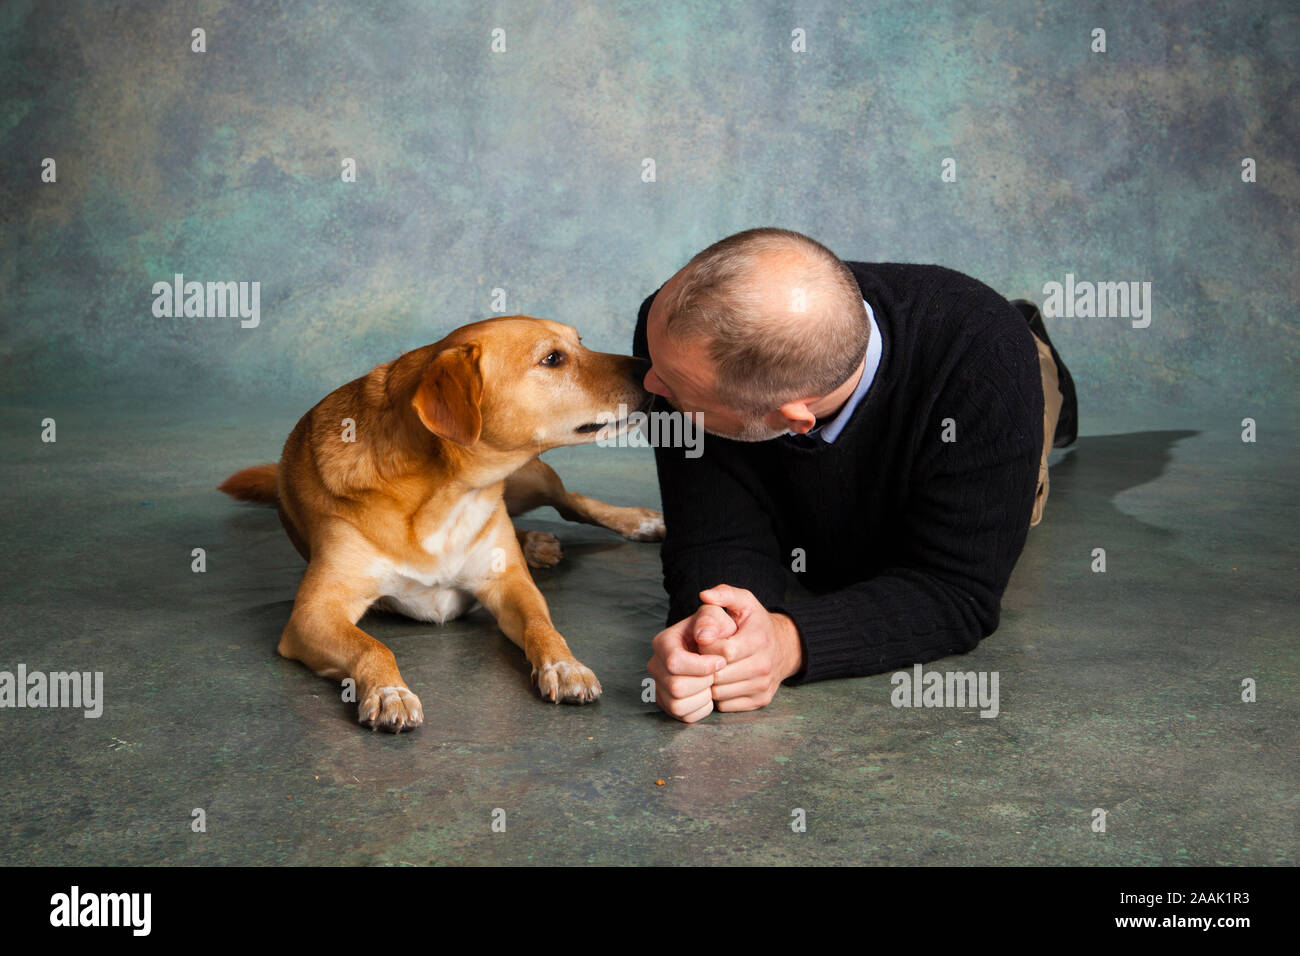 Portrait of man with dog Stock Photo